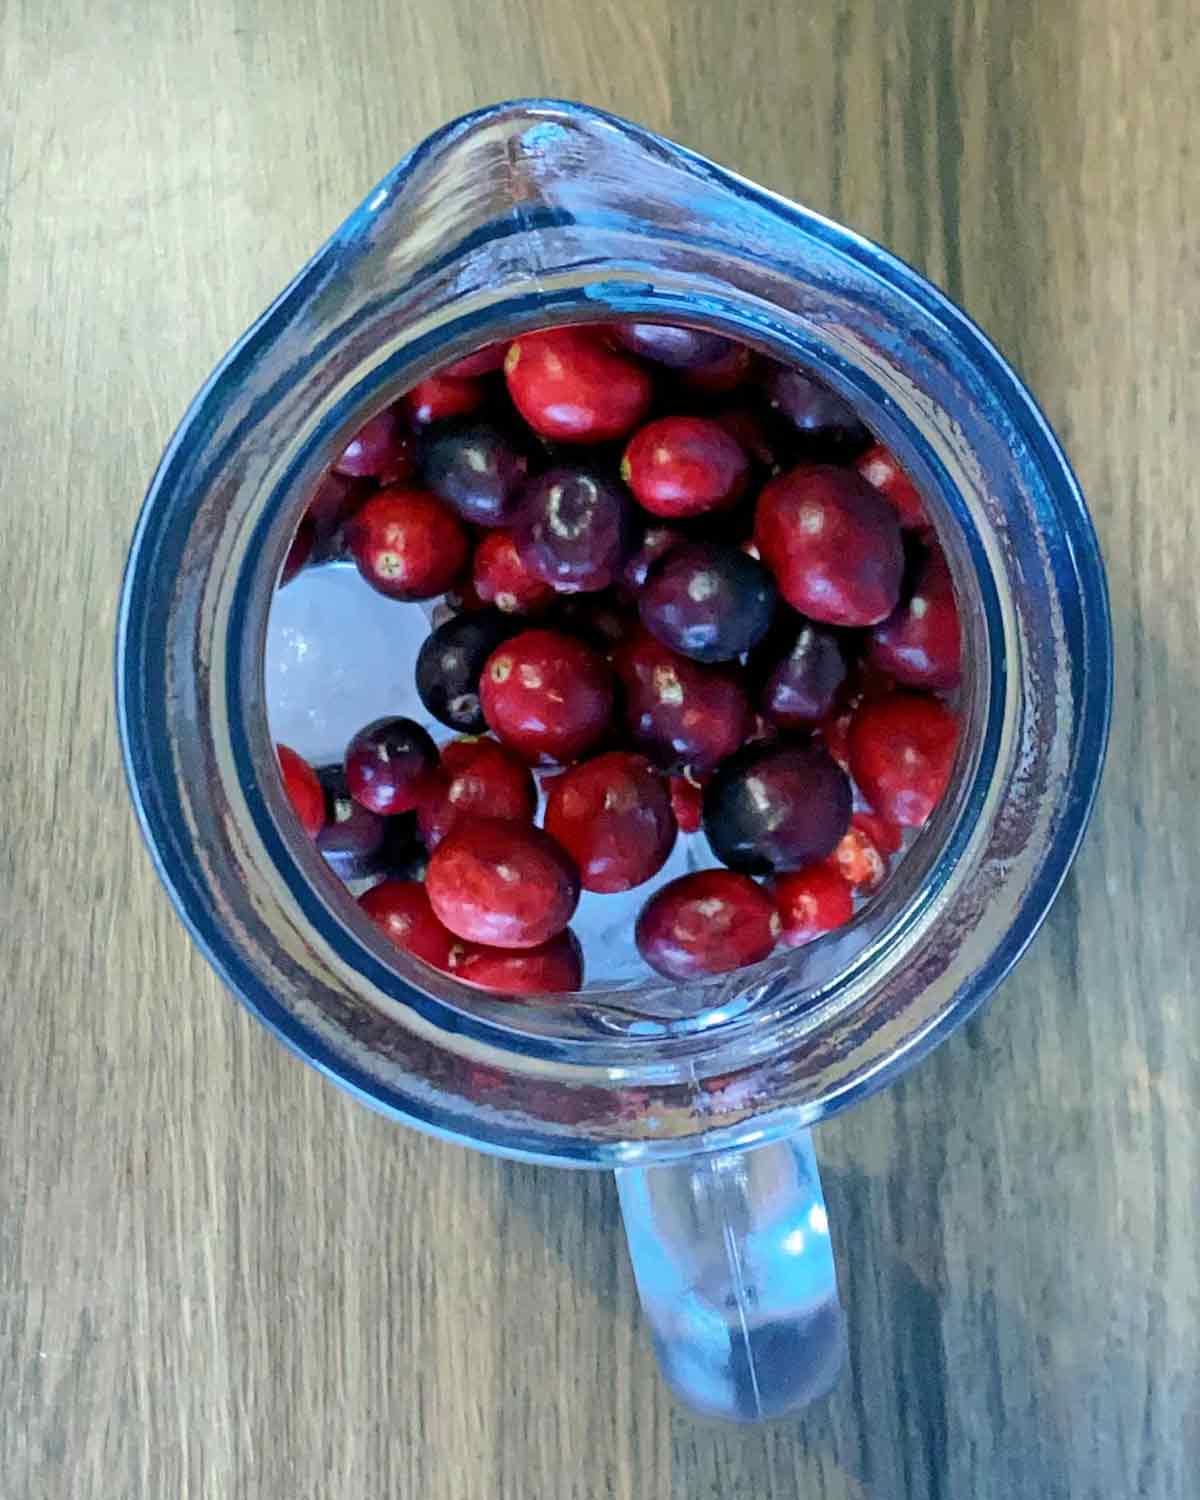 Fresh cranberries added to the jug.